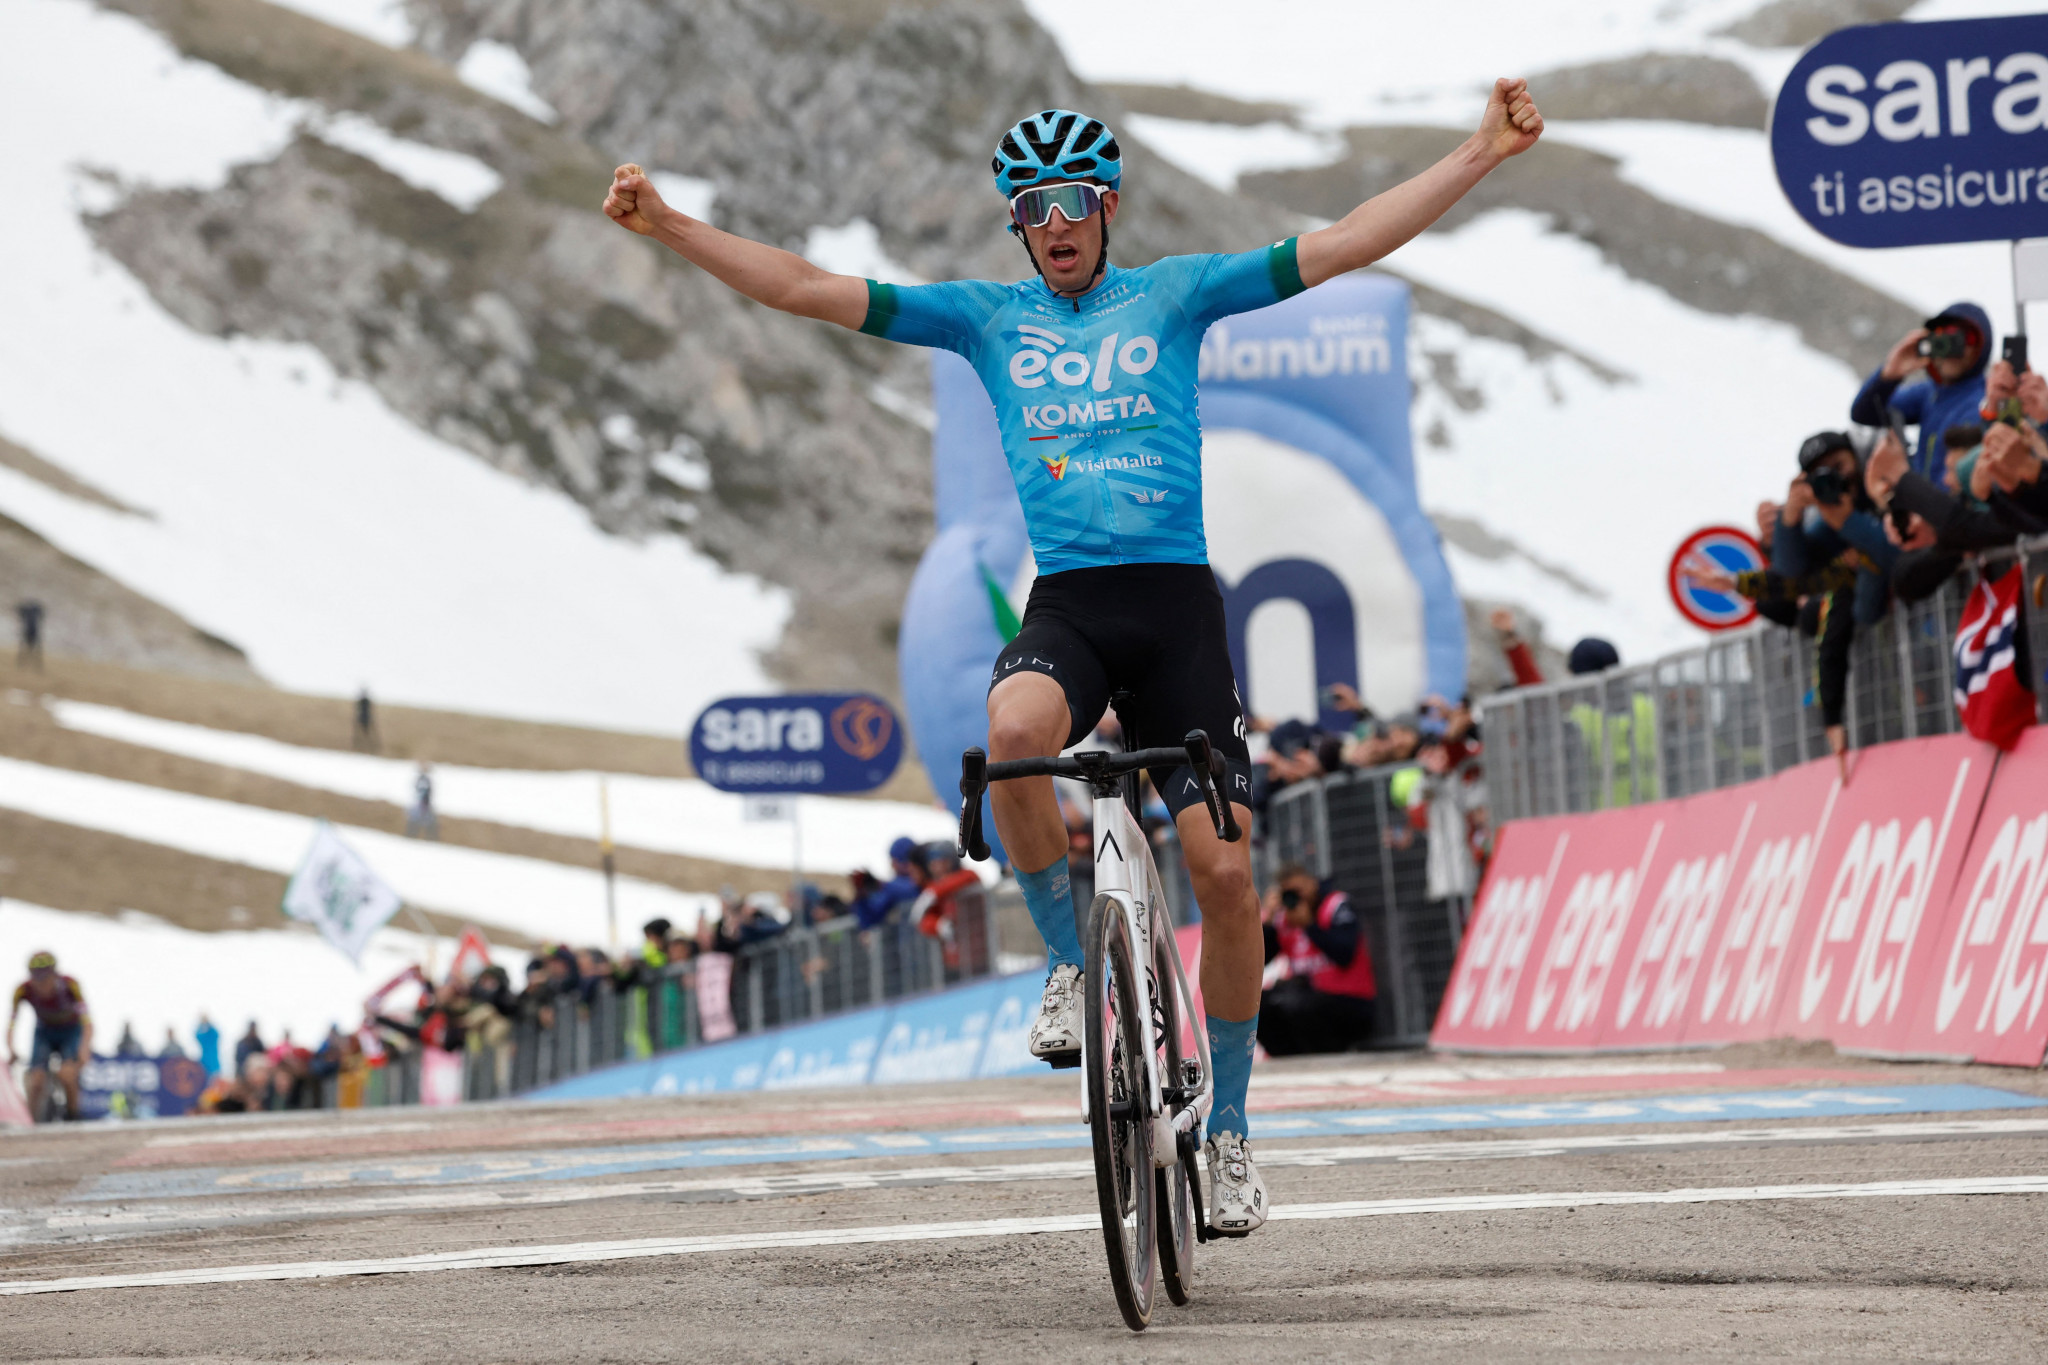 Bais records first ever win in his cycling career on stage seven of Giro d’Italia